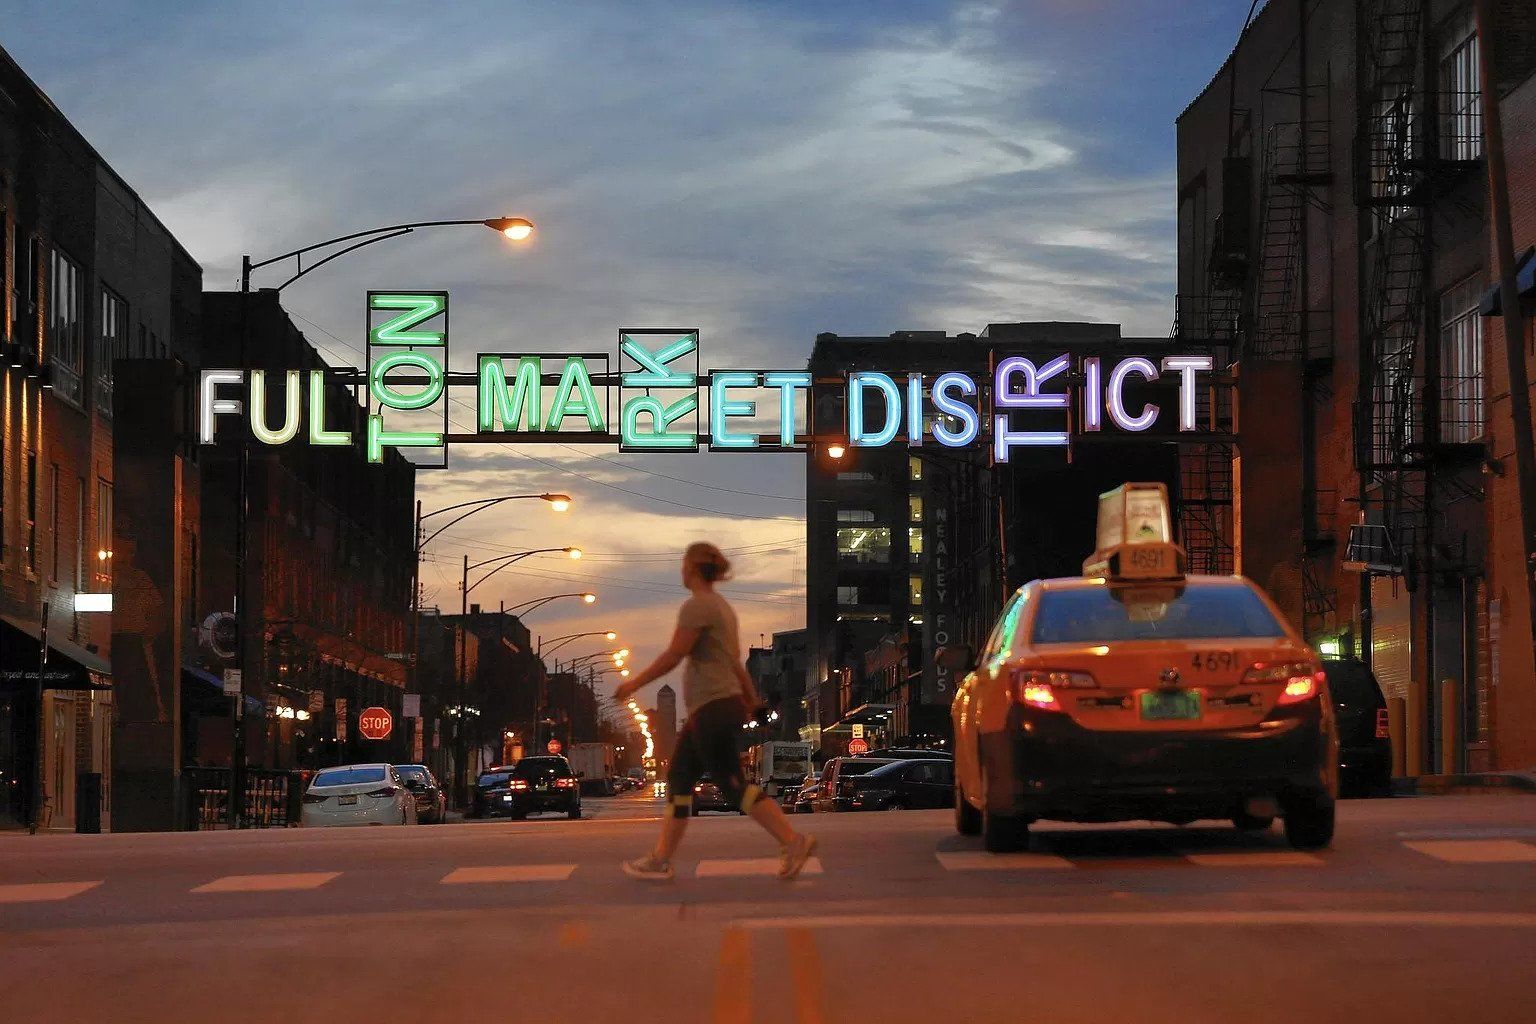 A man crosses a street in front of a sign that says full market district.